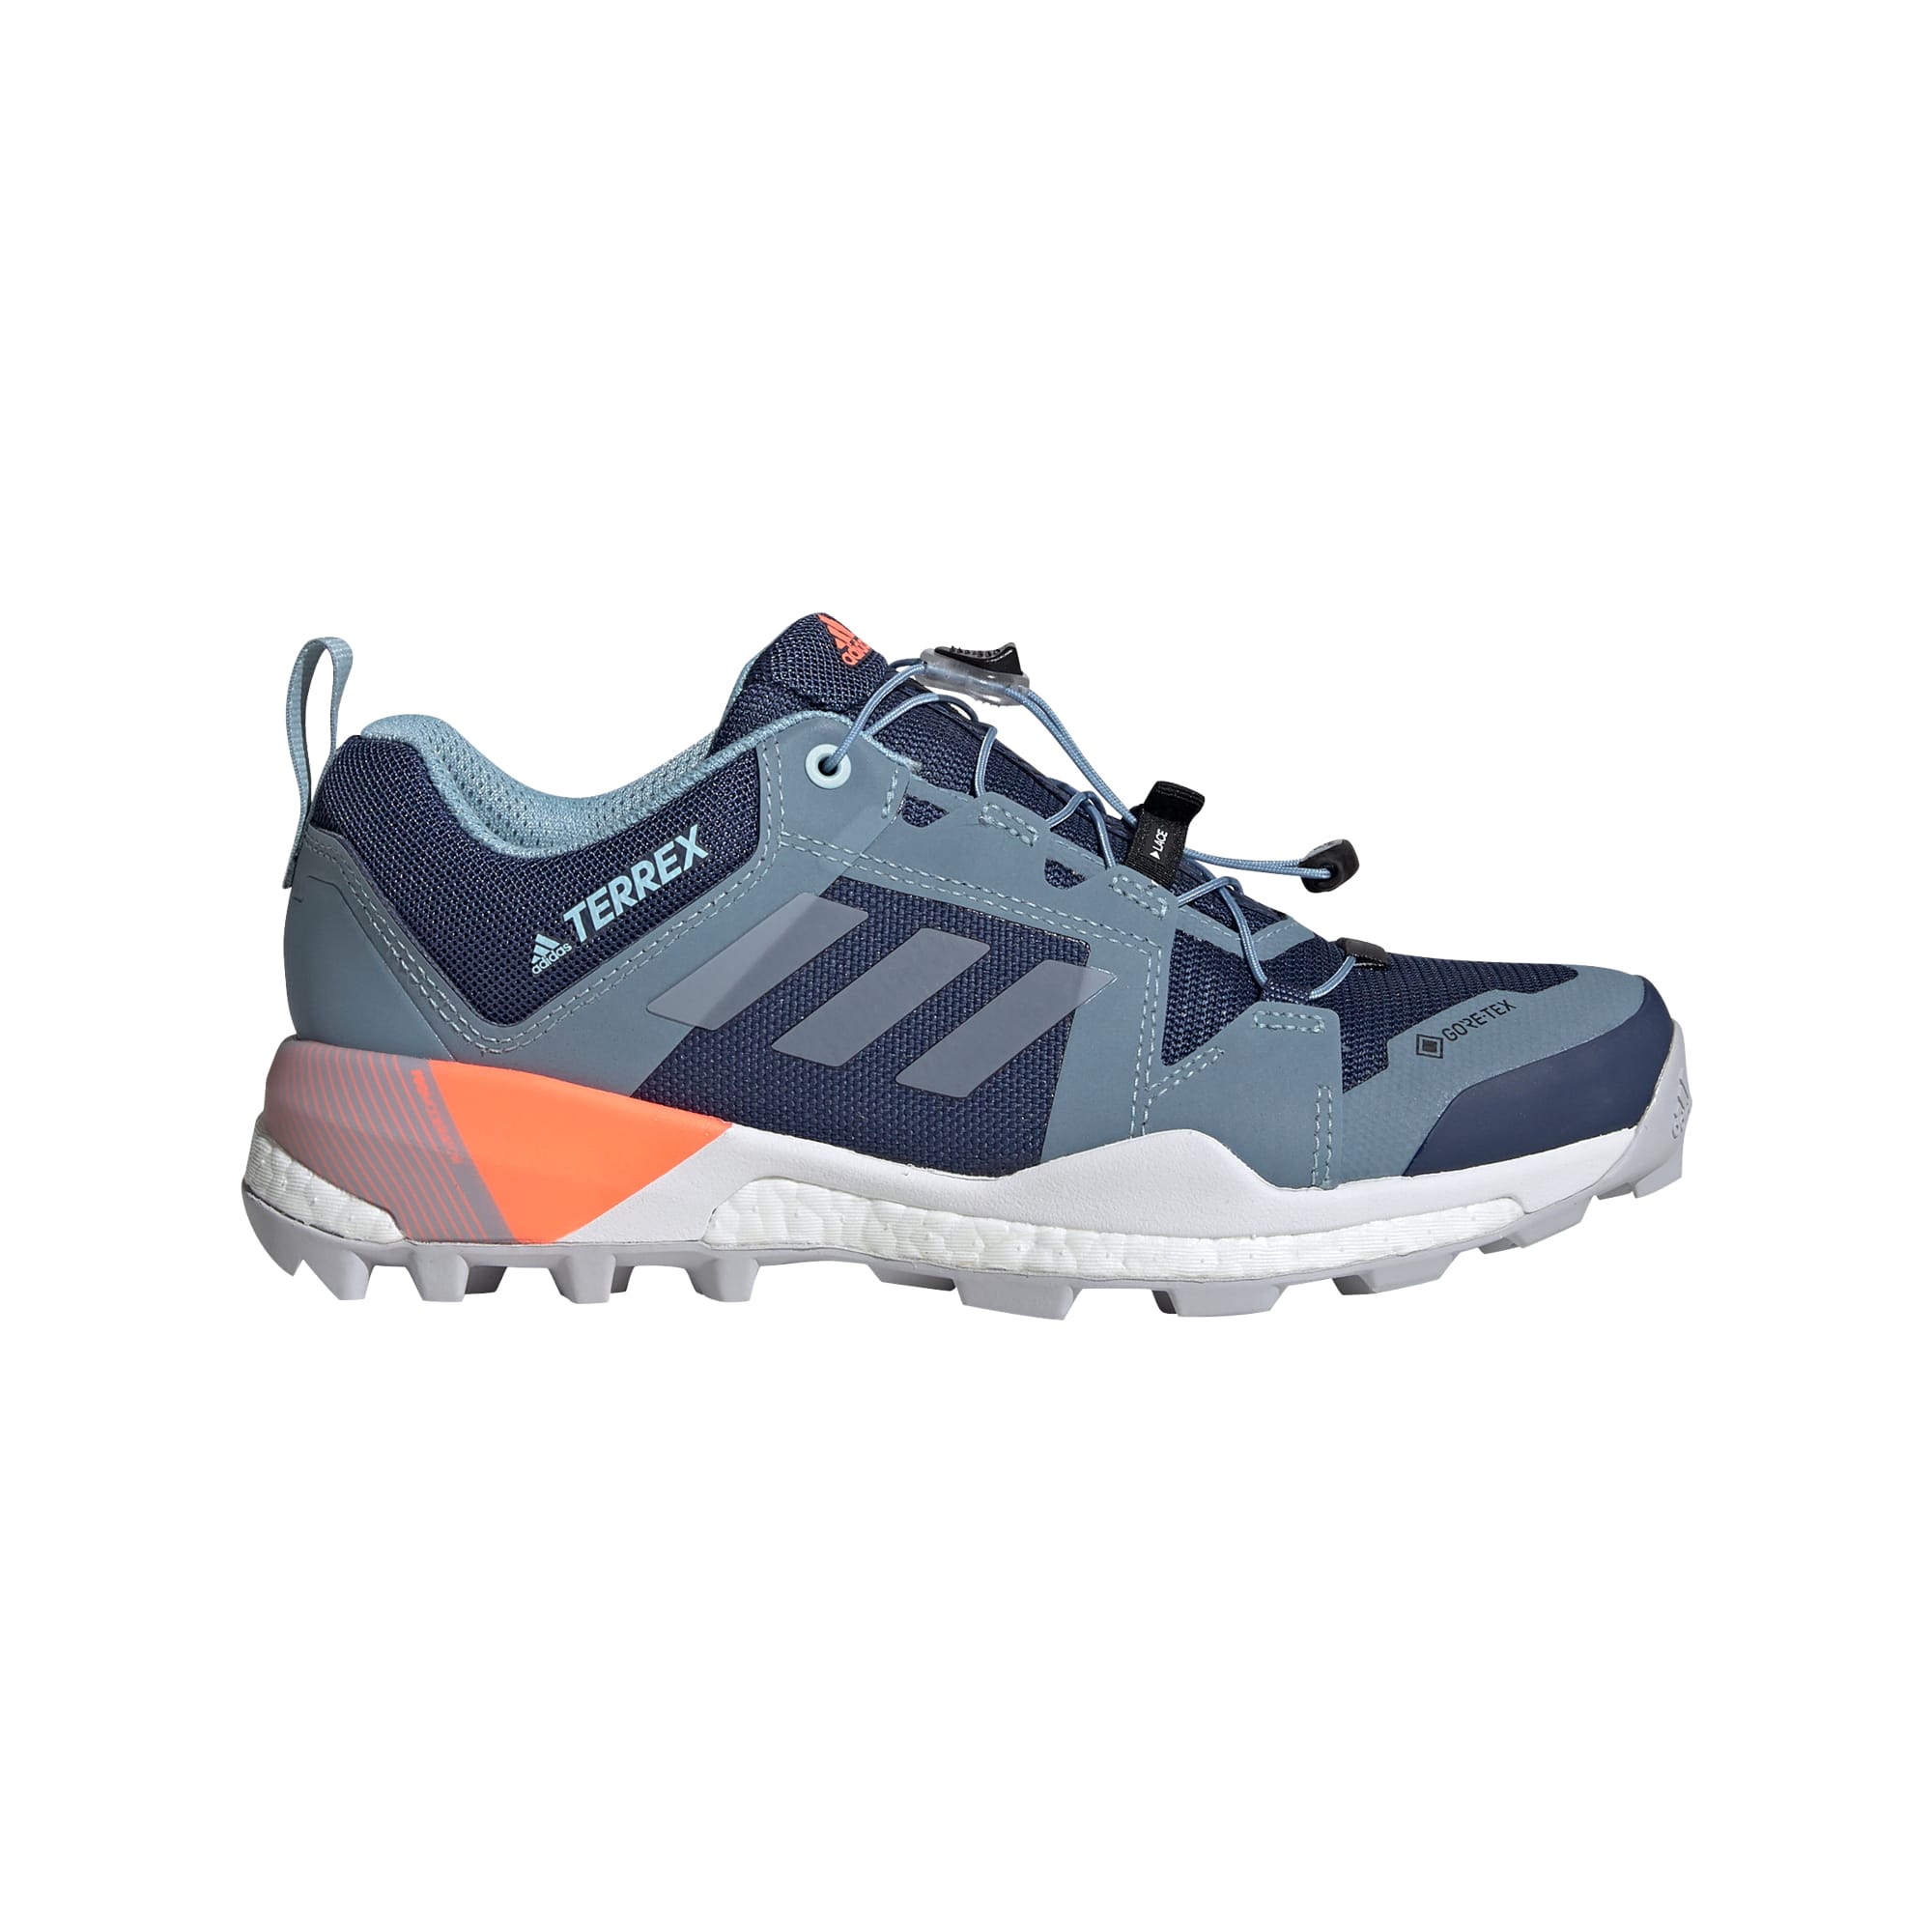 Køb Women's XT Gore-Tex Hiking Shoes fra Outnorth